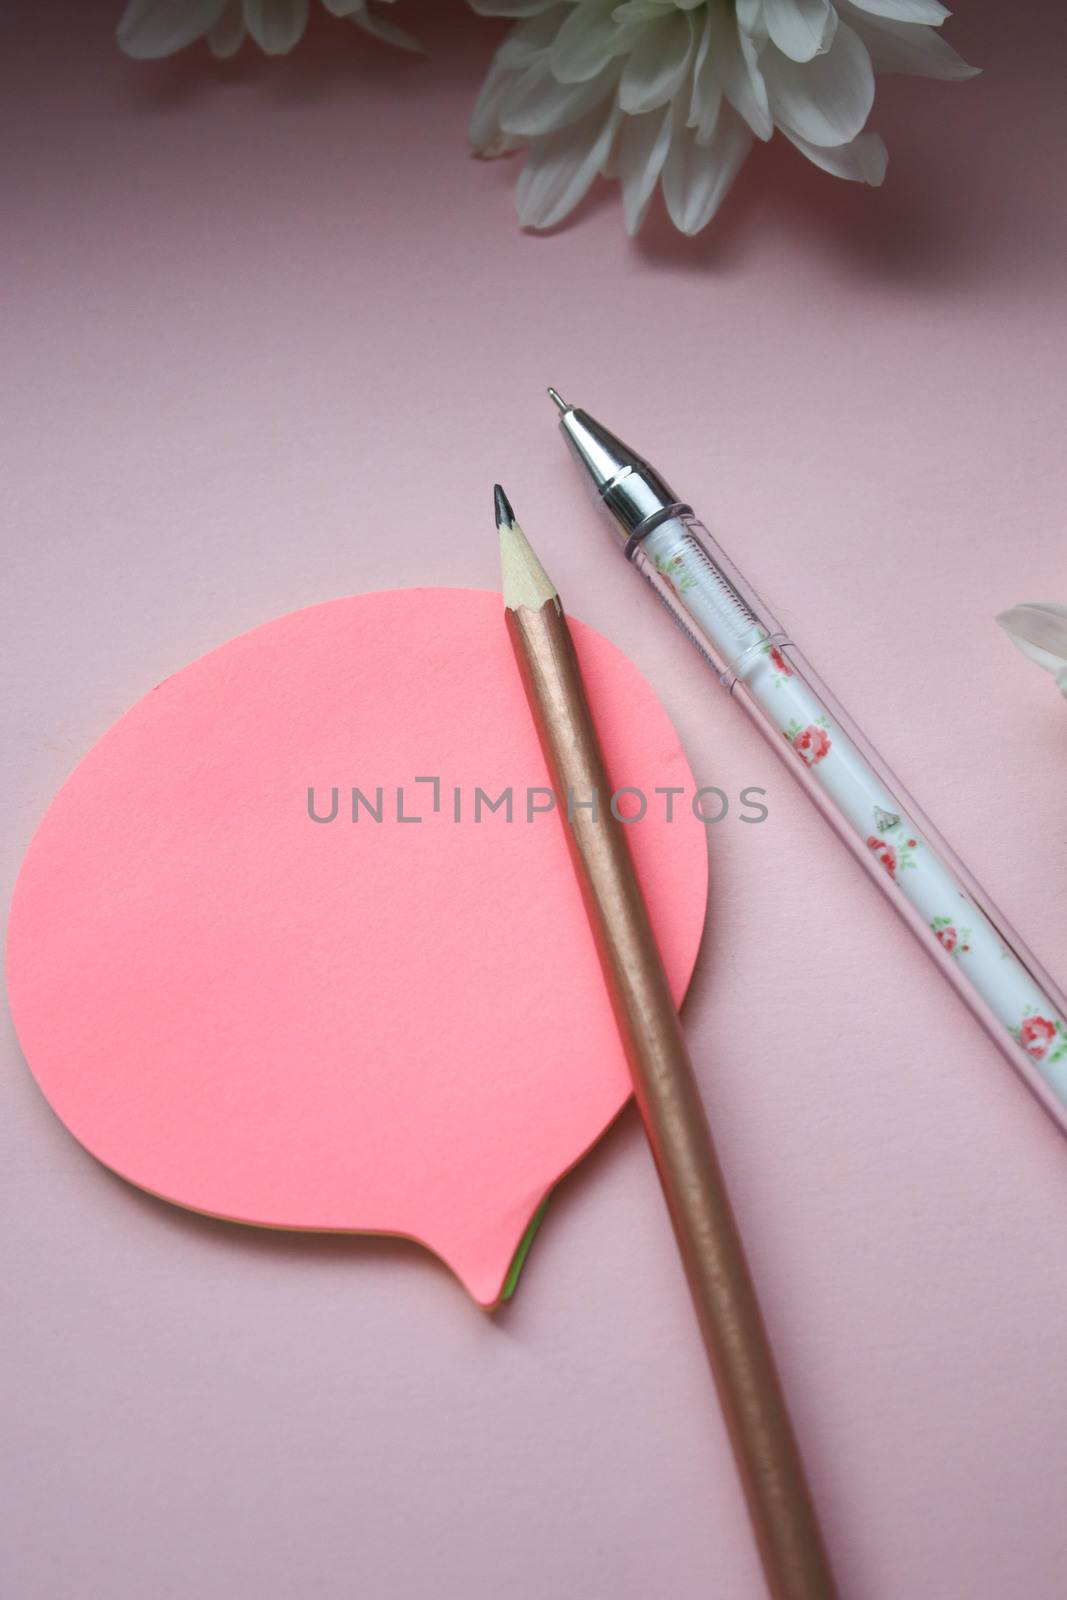 Pink stickers with a simple pencil and pen, on top are chrysanthemum flowers. The handle is white on the outside with pink patterns